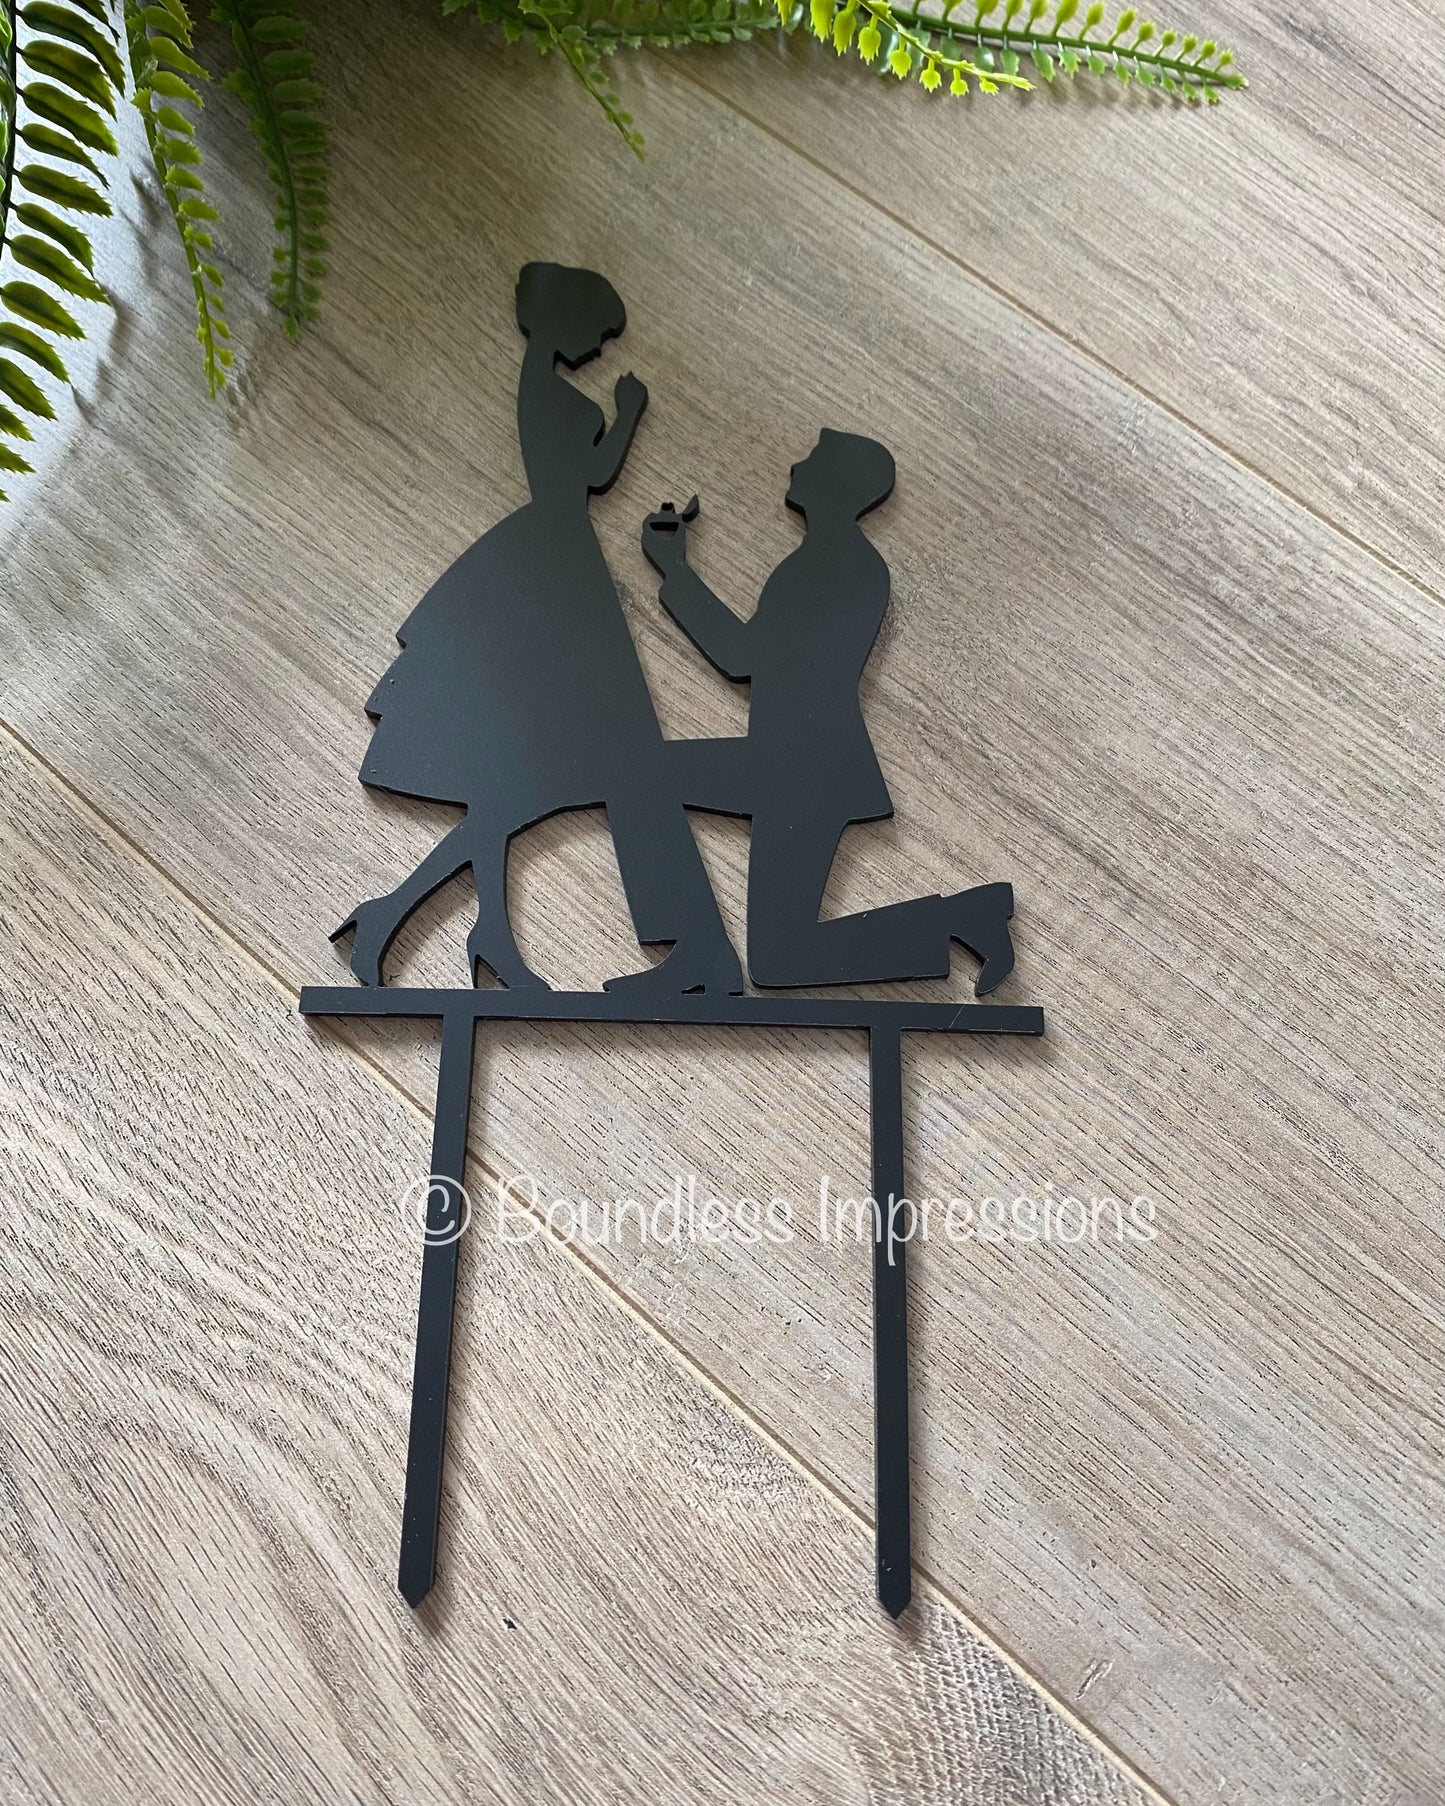 Acrylic ‘Silhouette’ Cake Toppers